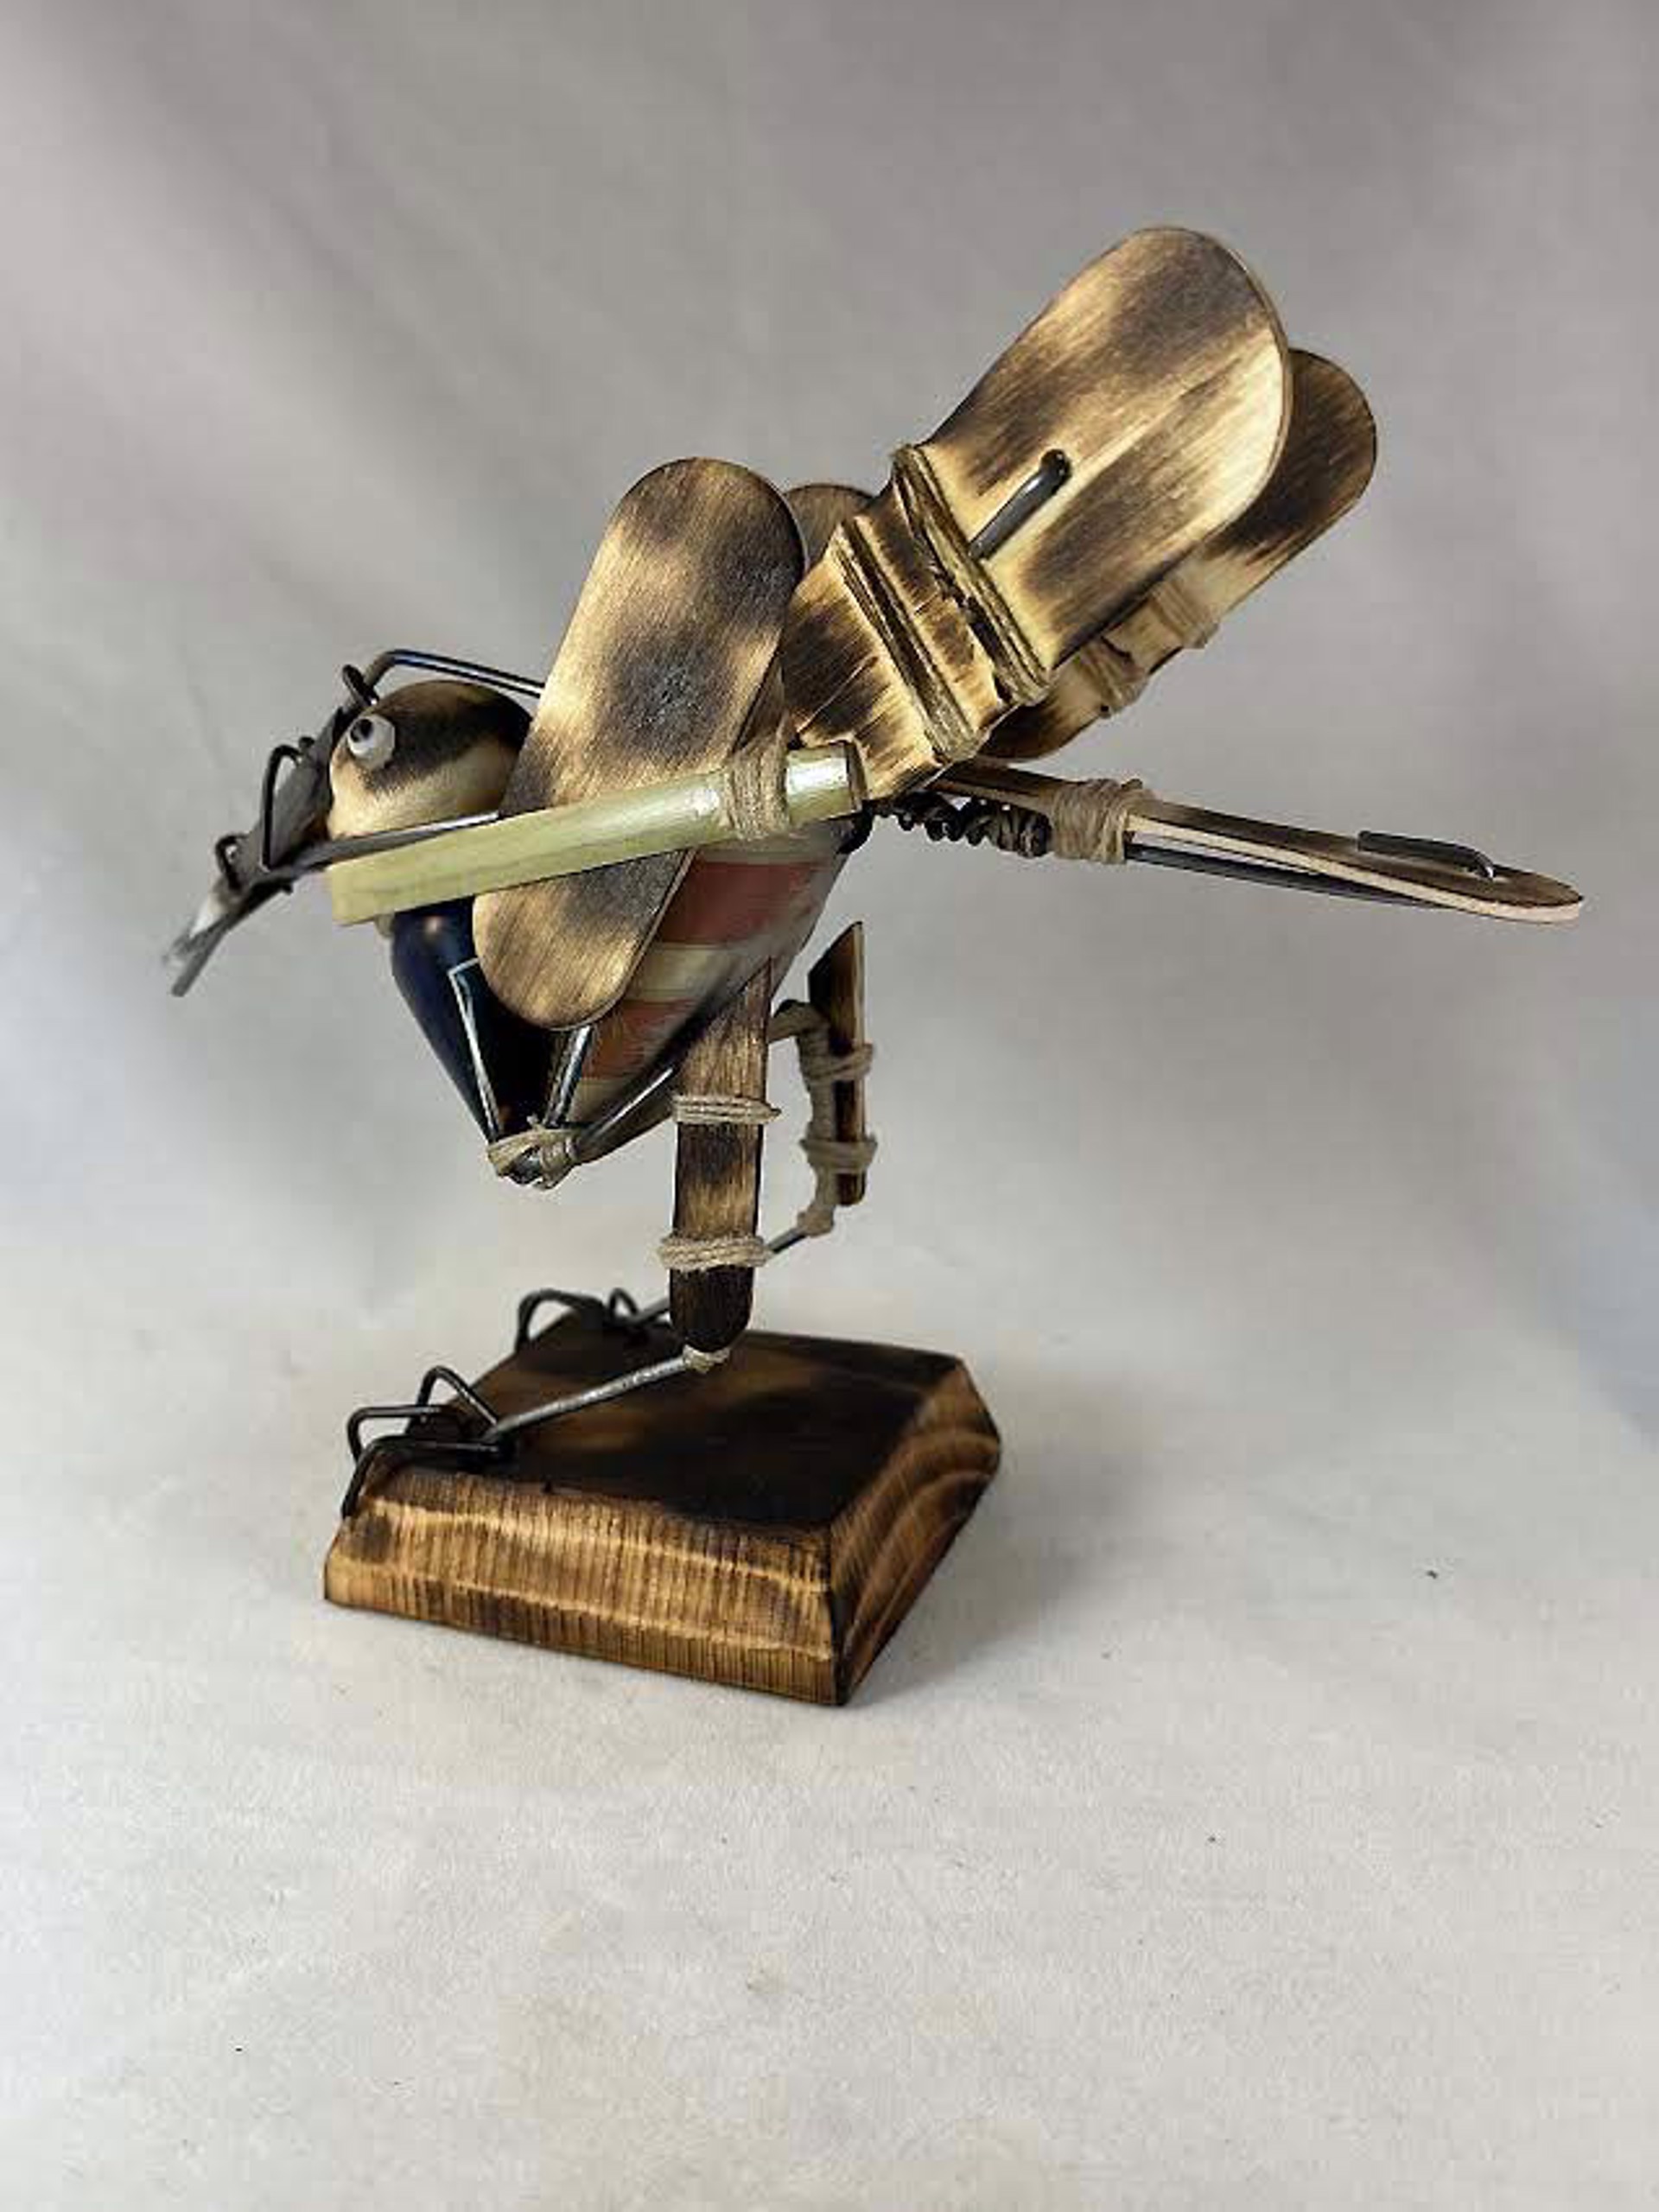 Bent Can Bird by Andrew Bascle